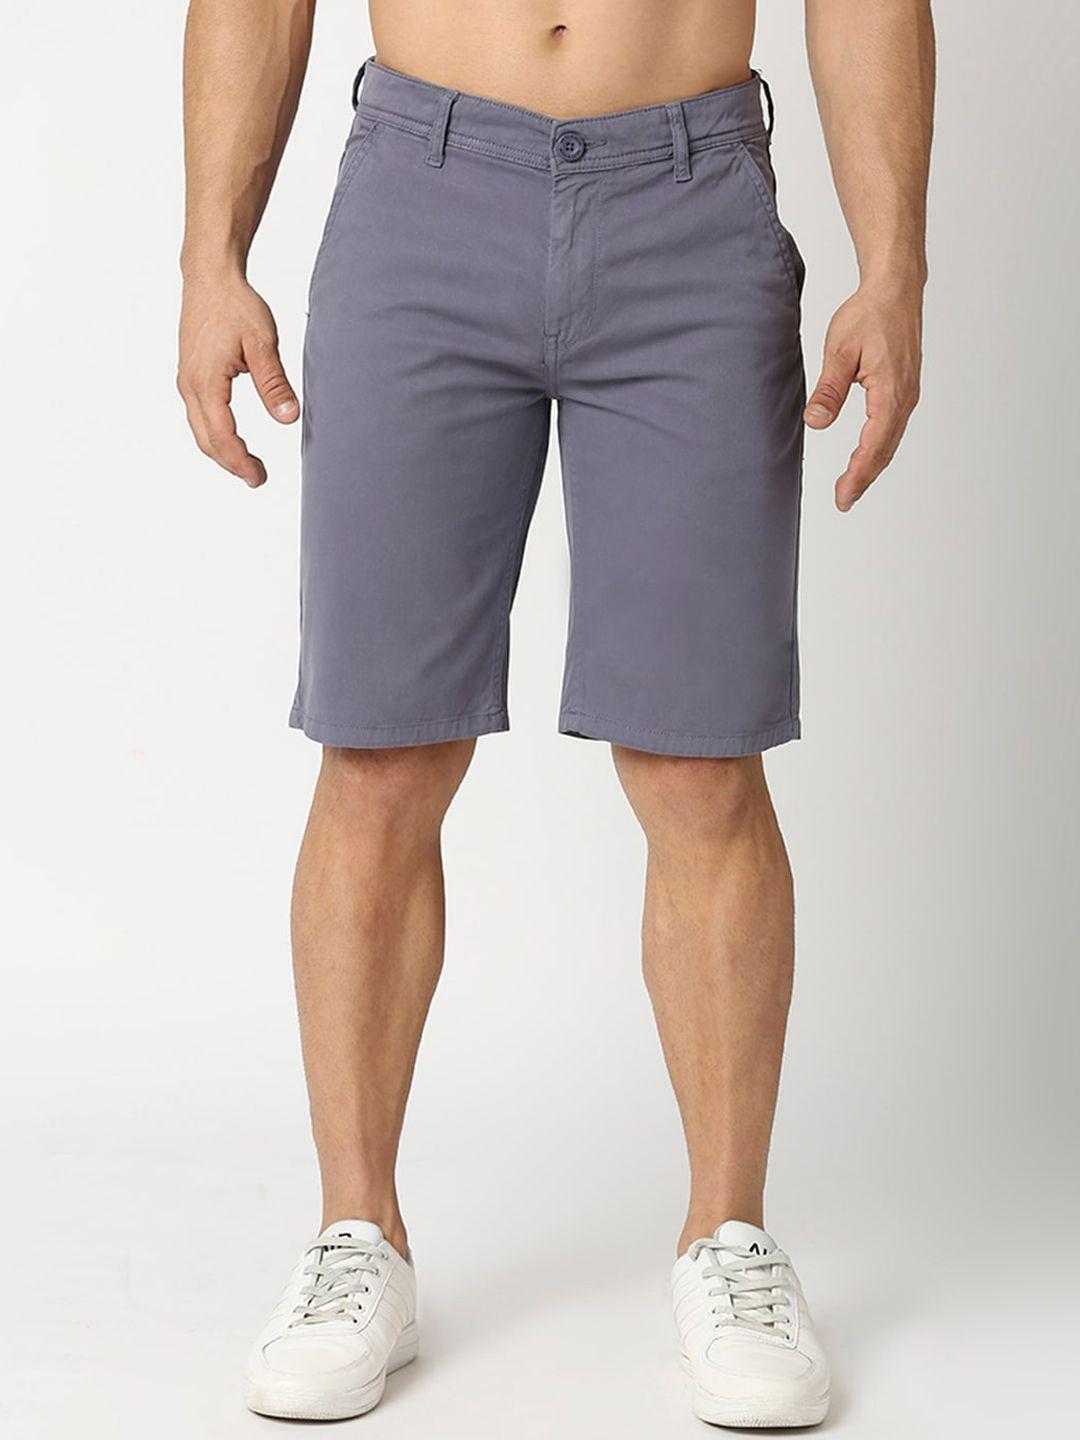 here&now men mid rise slim fit chinos shorts